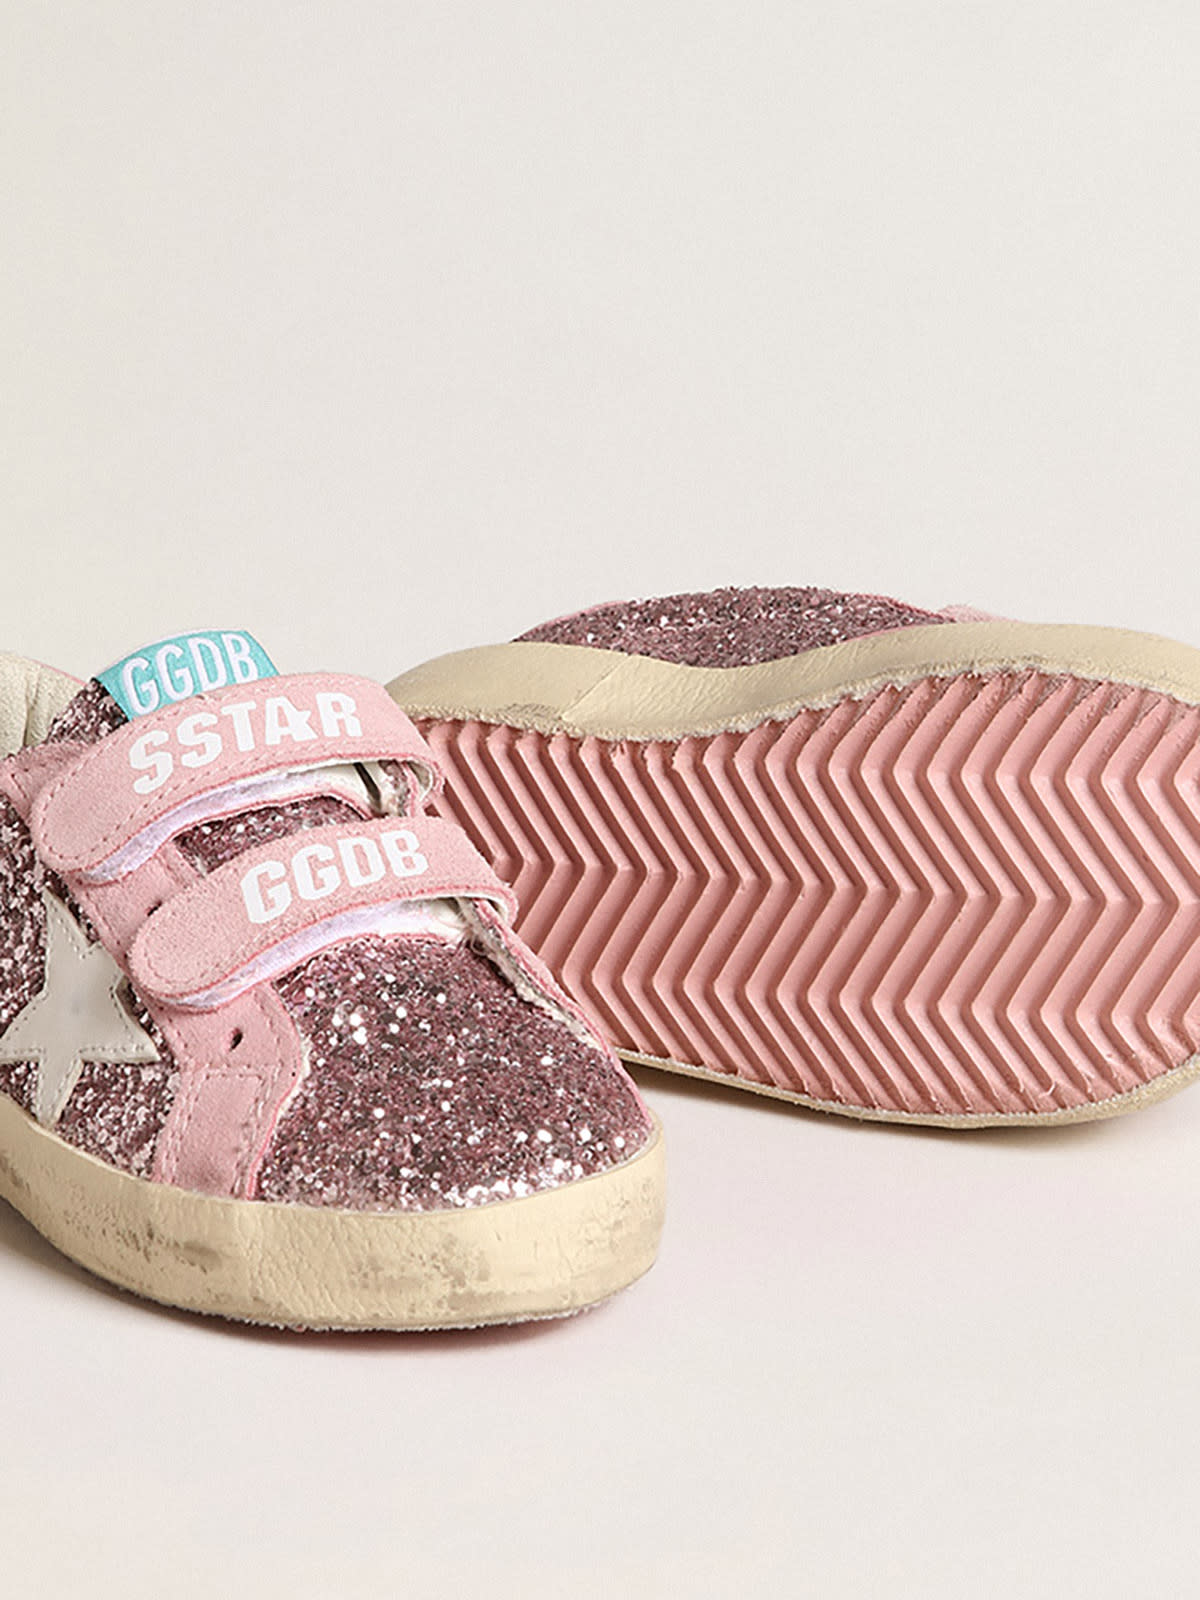 Golden Goose - Old School Junior in lilac glitter with white star and pink heel tab in 